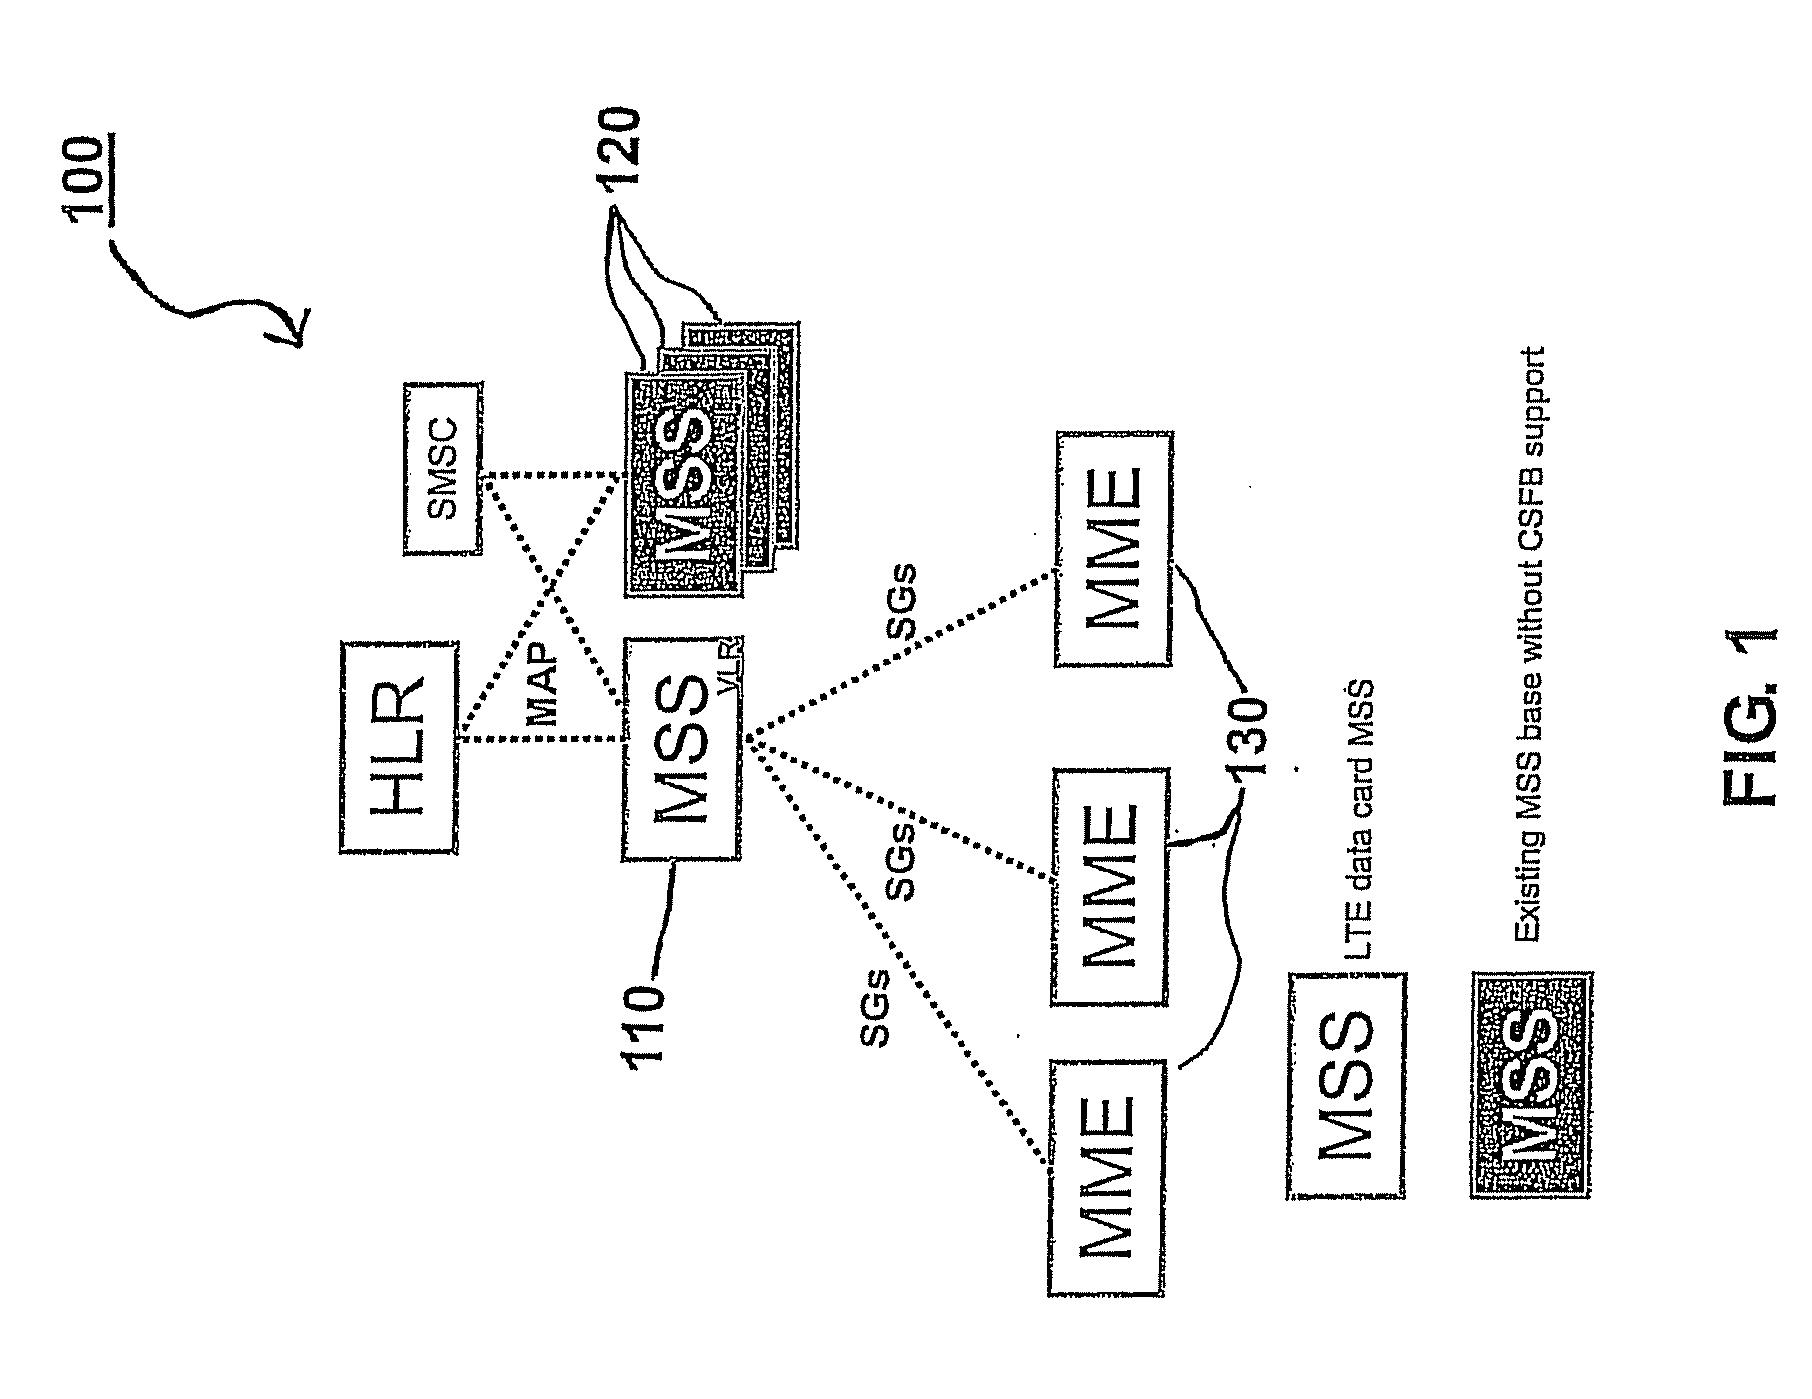 Mobile management entity operating in communications network and selection method therefor